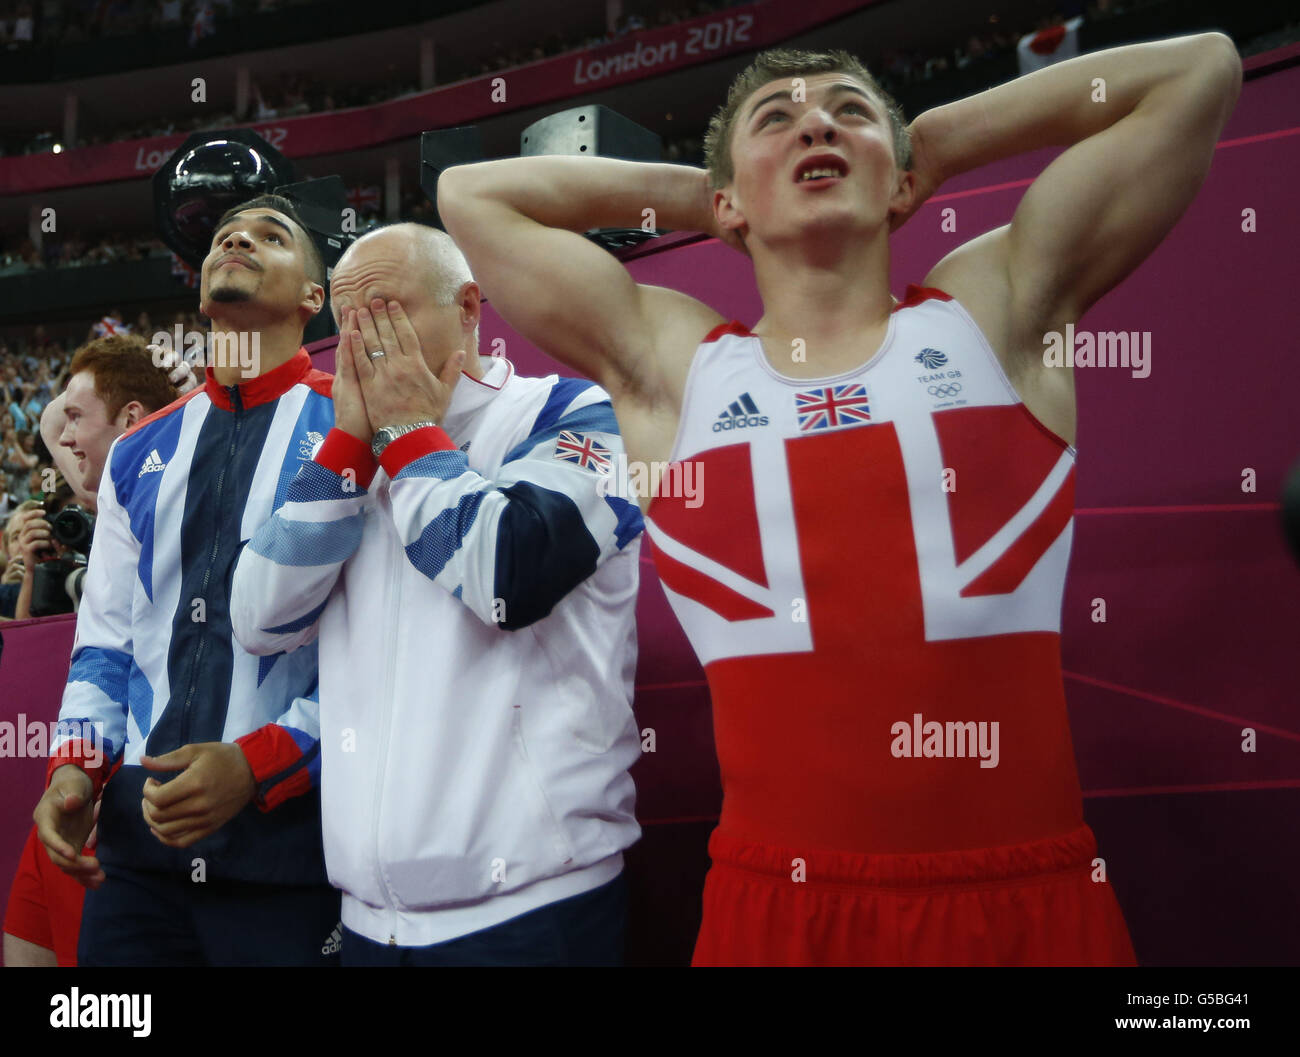 Team Britain reacts after the team got bumped down from silver to bronze upon a result review during the Artistic Gymnastic men's team final at the 2012 Summer Olympics, Monday, July 30, 2012, in London. After judges spent about five minutes reviewing three-time world champion Kohei Uchimura on the pommel horse, his score was revised and Japan was awarded the silver medal with Britain getting bumped down to bronze. (AP Photo/Matt Dunham) Stock Photo